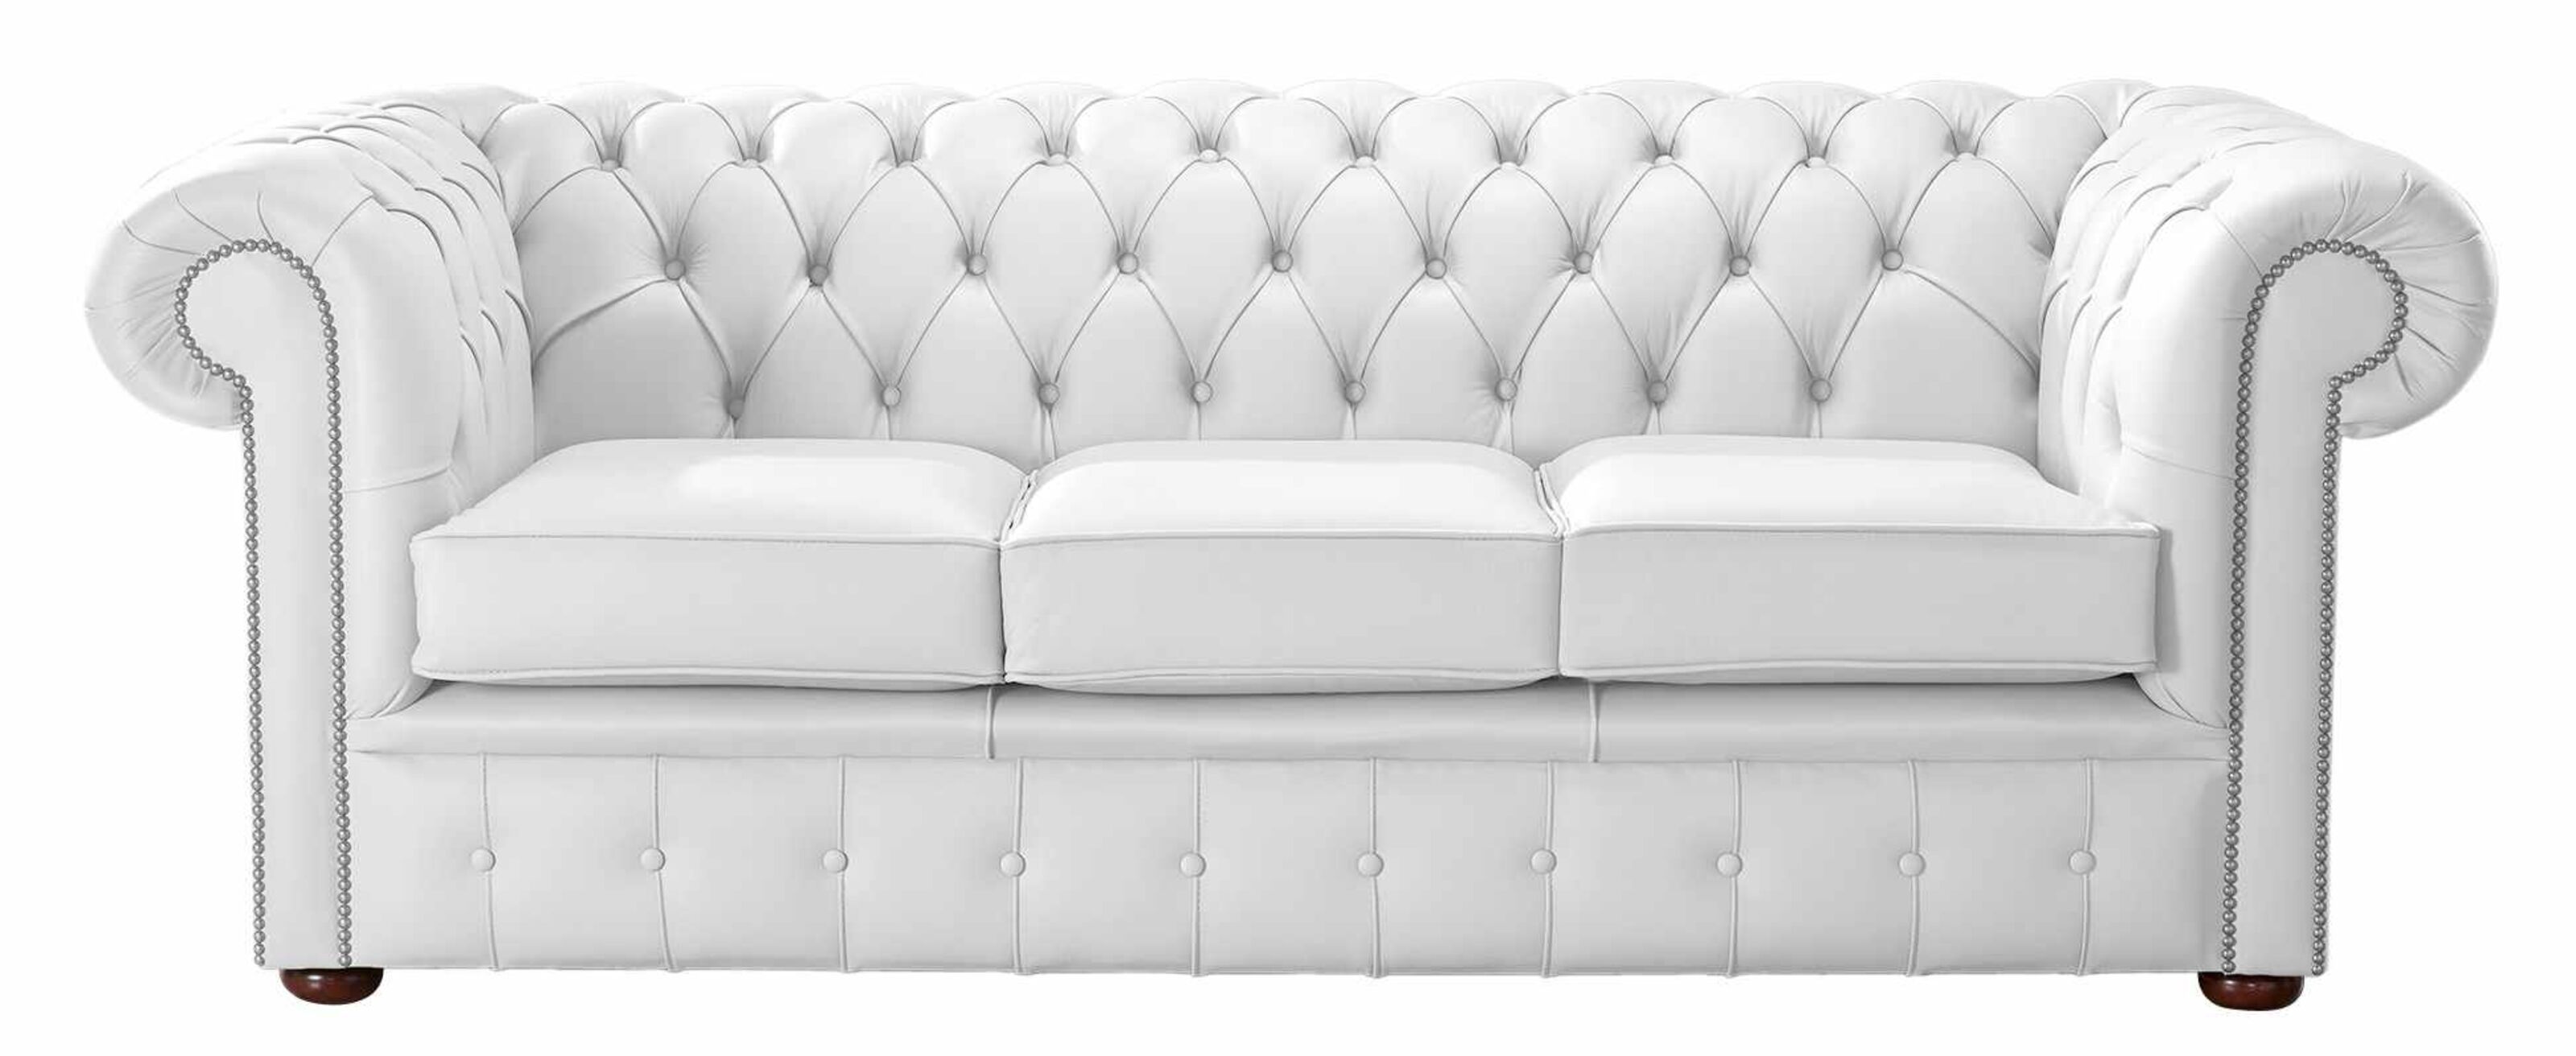 Savings Galore Black Friday Chesterfield Sofa Specials  %Post Title